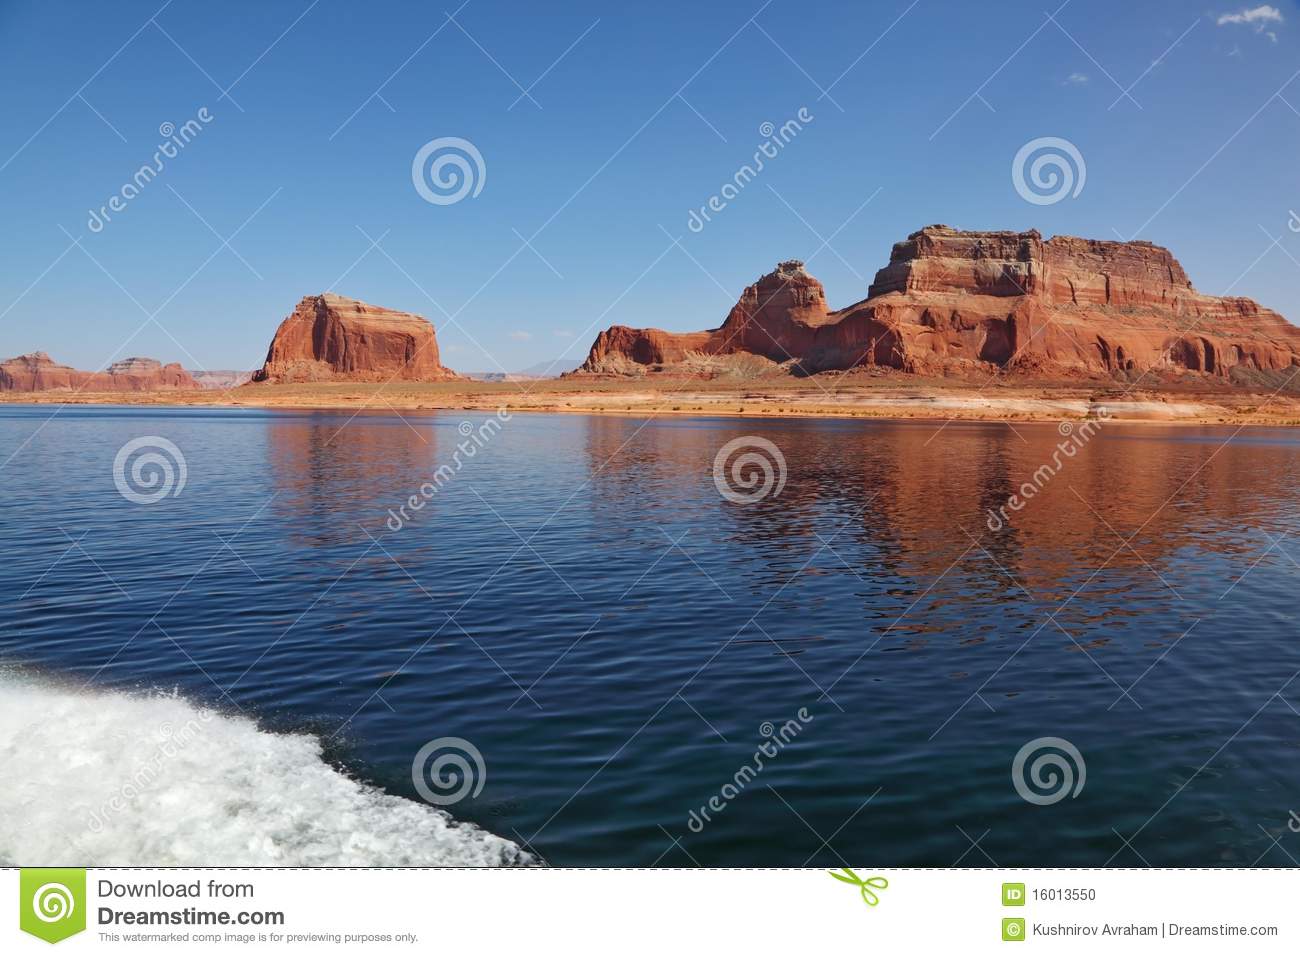 Picturesque Red Cliffs Reflected In The Smooth Water Of The Lake